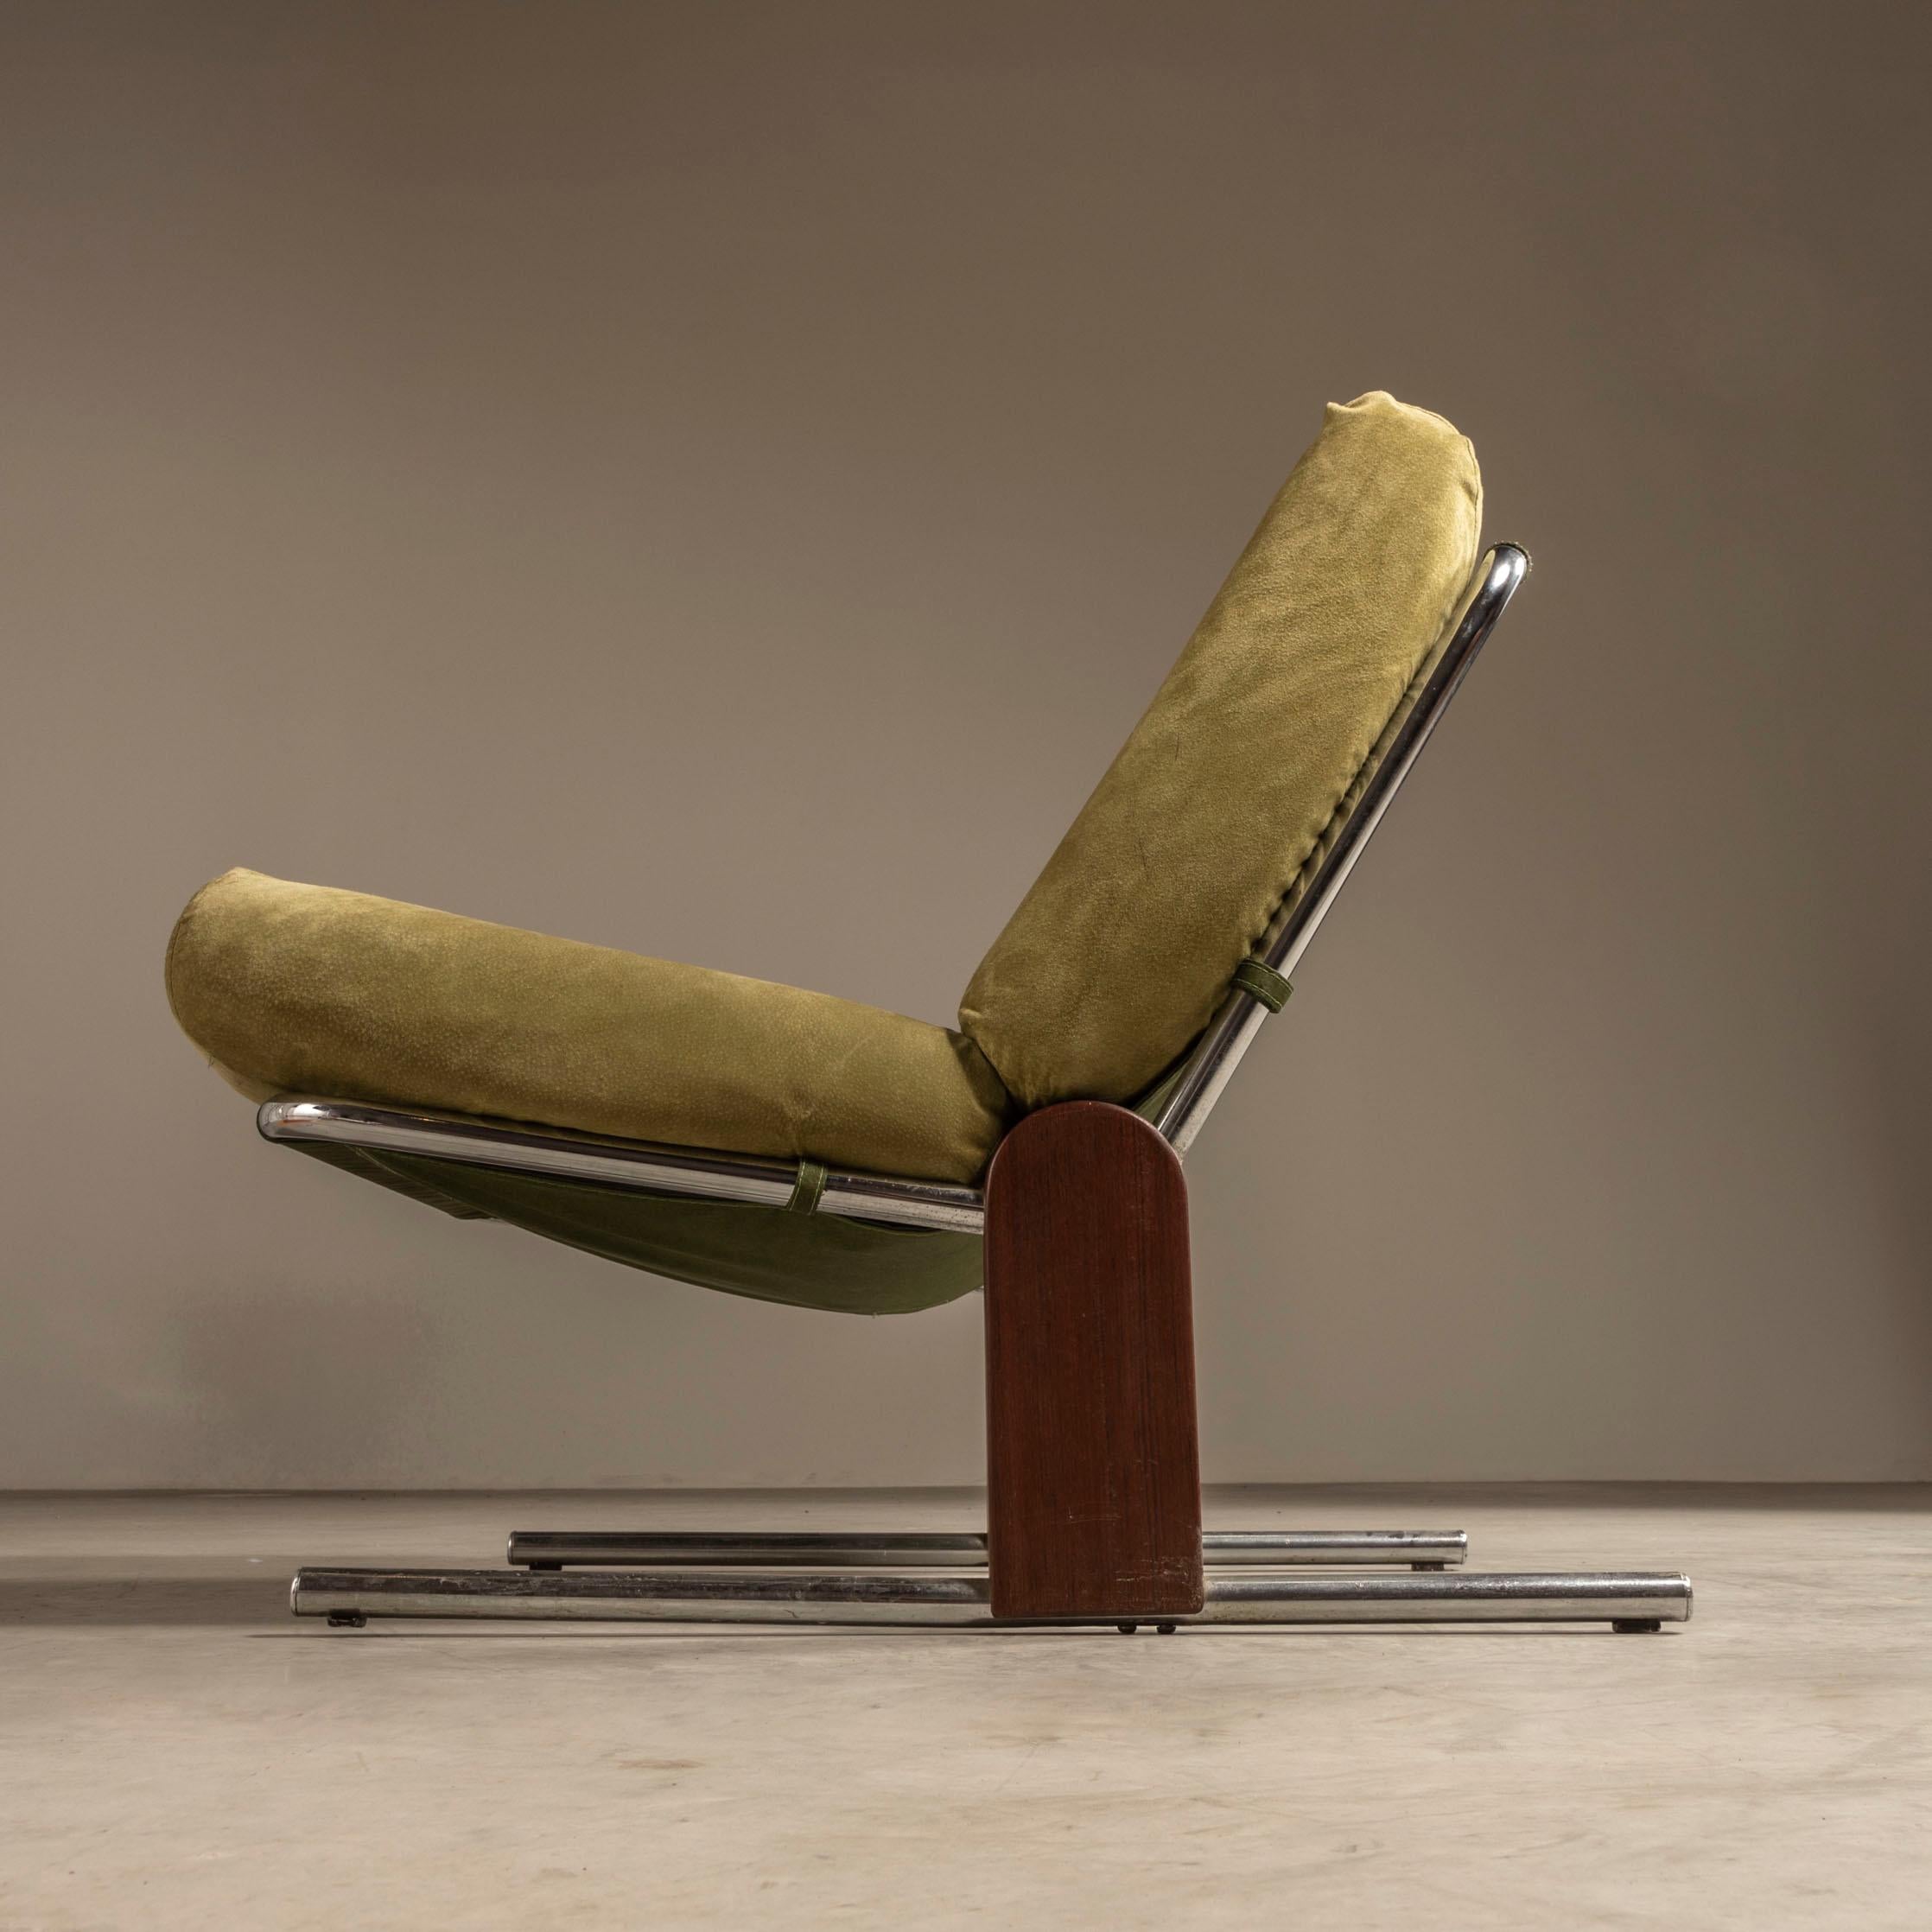 20th Century Pair of Contempo Lounge Chairs, by Percival Lafer, Brazilian Mid-Century Modern For Sale